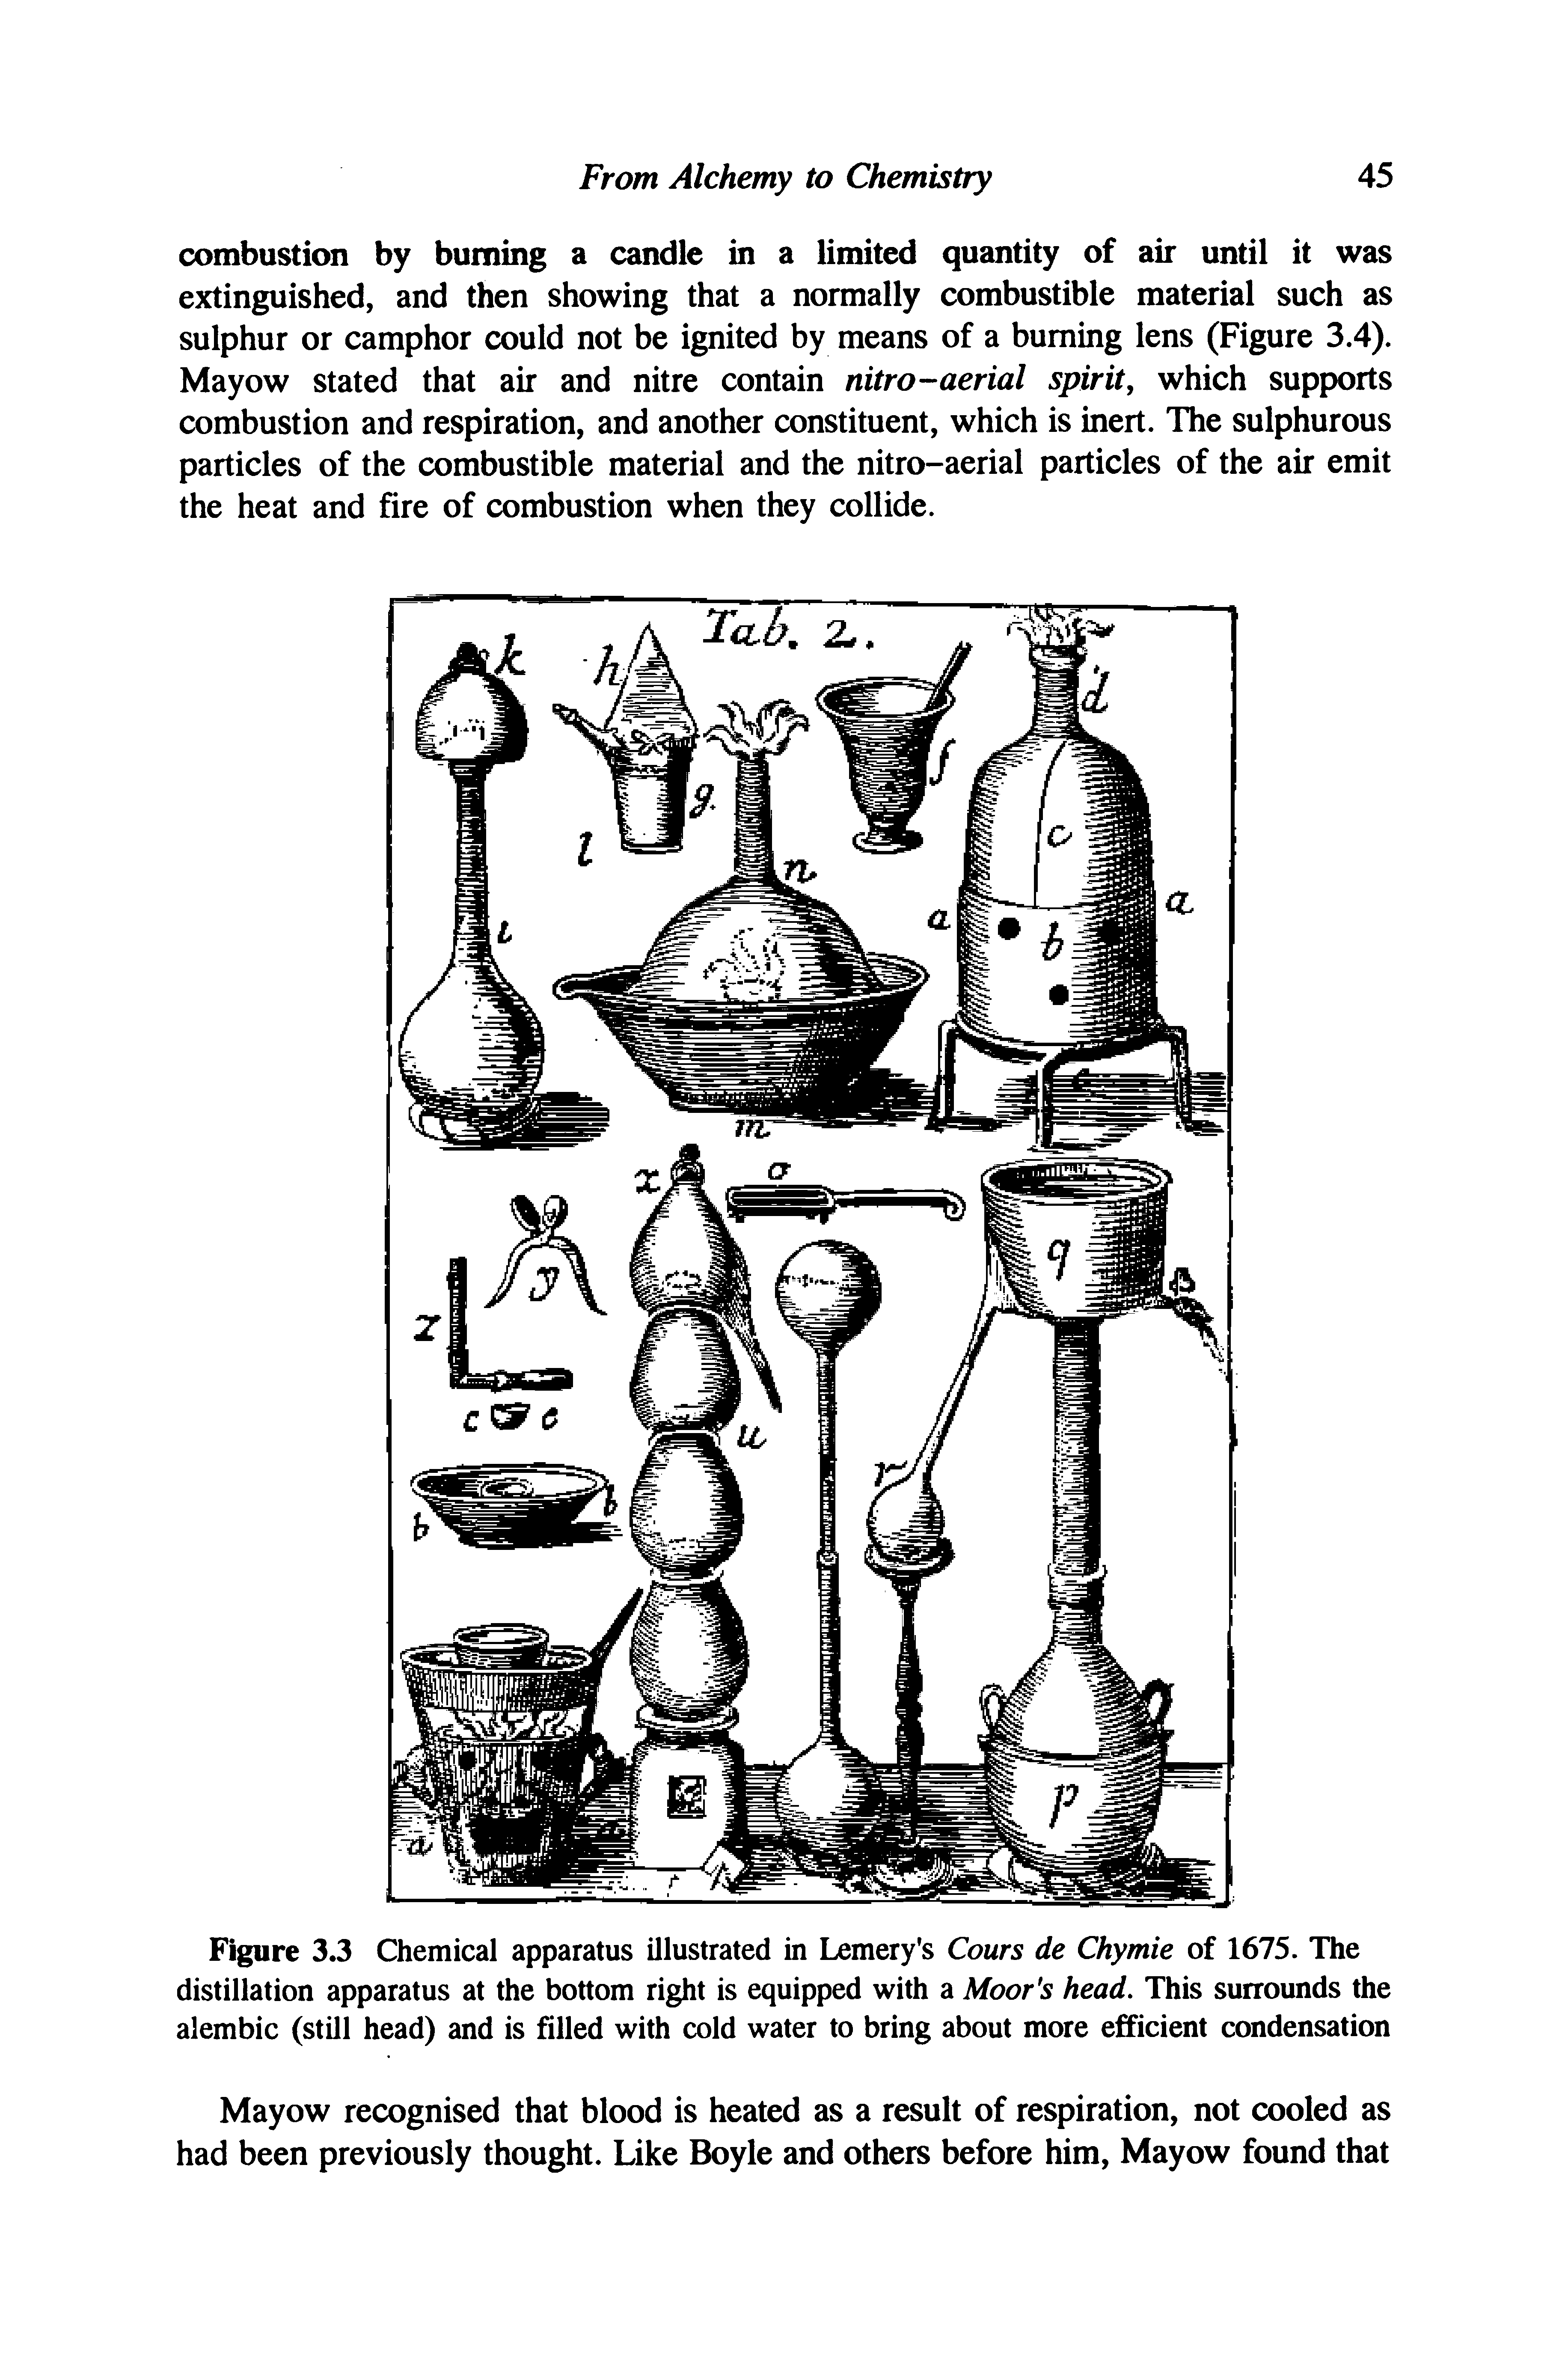 Figure 3.3 Chemical apparatus illustrated in Lemery s Cours de Chymie of 1675. The distillation apparatus at the bottom right is equipped with a Moor s head. This surrounds the alembic (still head) and is filled with cold water to bring about more efficient condensation...